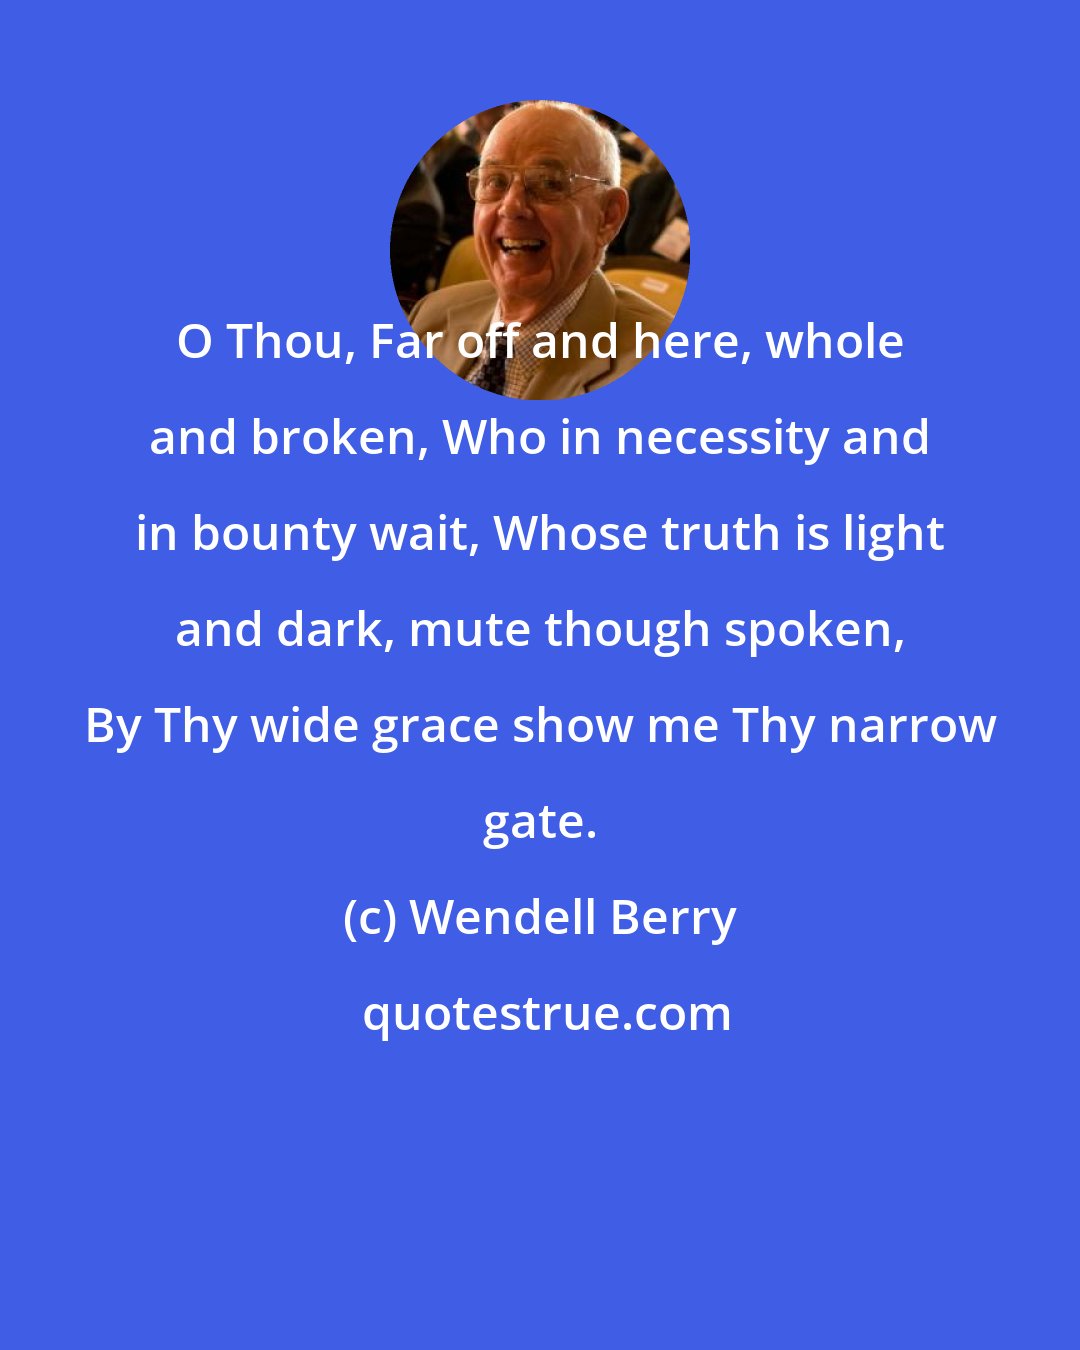 Wendell Berry: O Thou, Far off and here, whole and broken, Who in necessity and in bounty wait, Whose truth is light and dark, mute though spoken, By Thy wide grace show me Thy narrow gate.